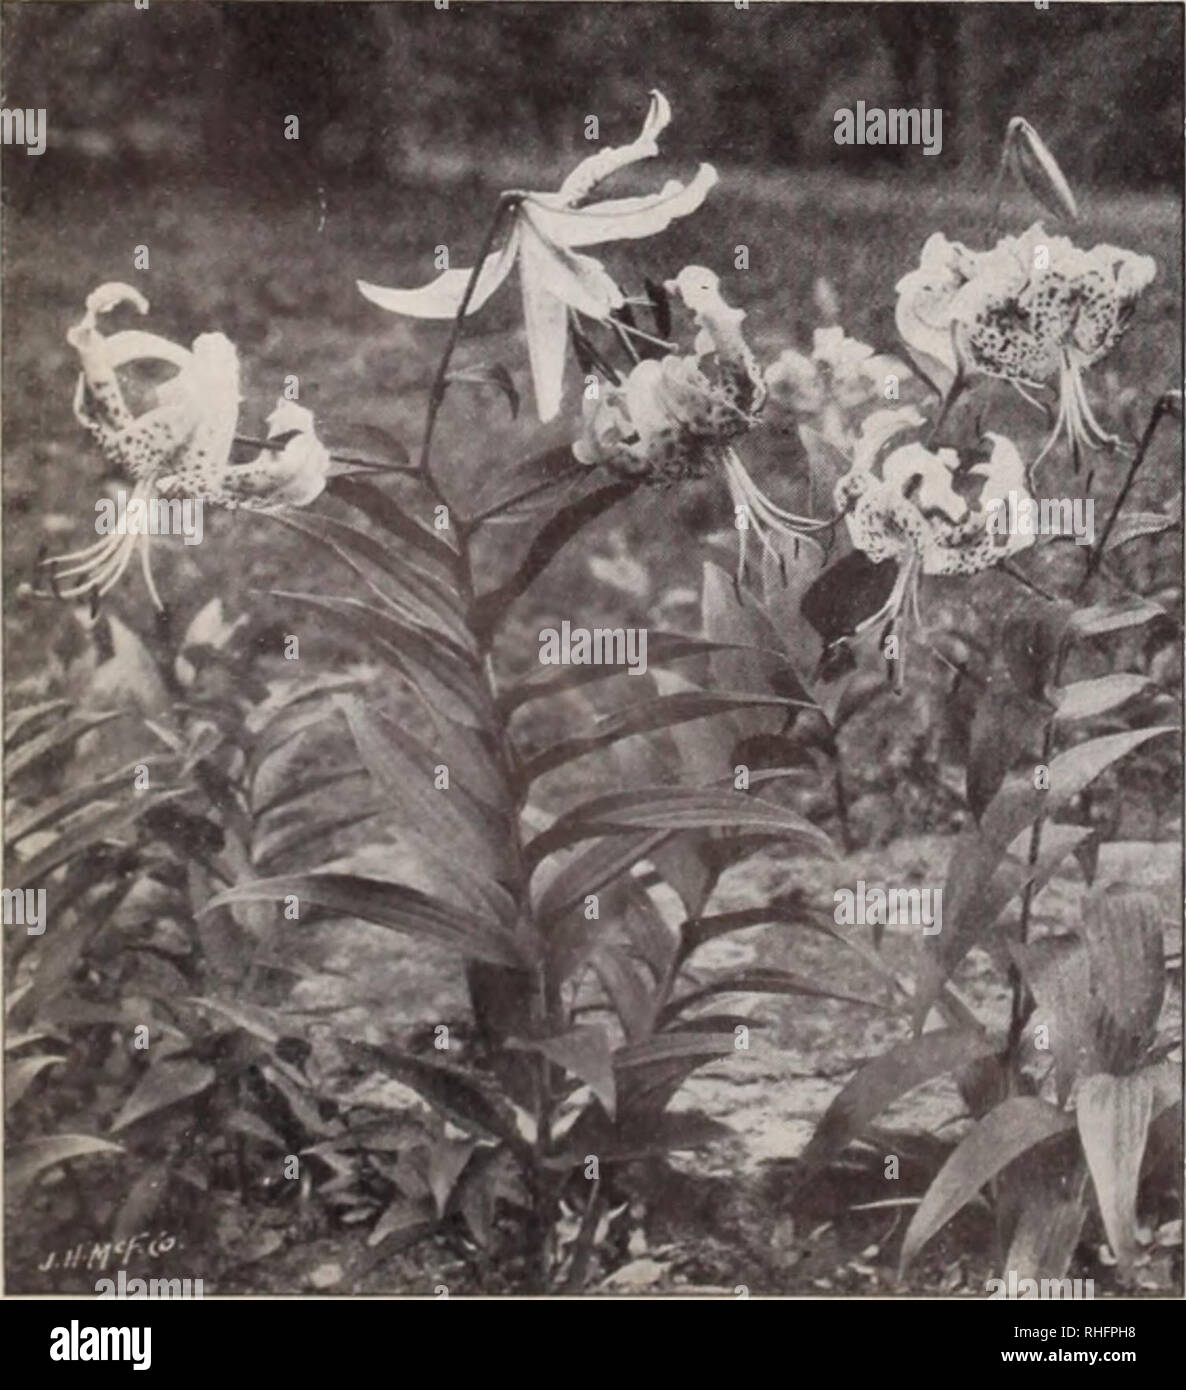 . Boddington's quality bulbs, seeds and plants / Arthur T. Boddington.. Nursery Catalogue. Lilium auratum (type) RARE LILIUM AURATUMS LILIUM AURATUM PICTUM. A very Each Doz. 100 choice type of Liliuvi auralutii: pure white, with red and yellow bands tliroiigh each petal $0 20 $2 00 $15 00. Lilium speeiosum (type) LILIUM AURATUM PLATYPHYLLUM. A Each Doz. 100 very strong and vigorous type of L. auiatum. Flowers of immense size, pure ivory-white, with a deep golden band through each petal $0 25 $2 50 $20 00 LILIUM AURATUM RUBRUM VITTATUM. . unique variety; flowers 10 to 12 inches across, ivory-w Stock Photo